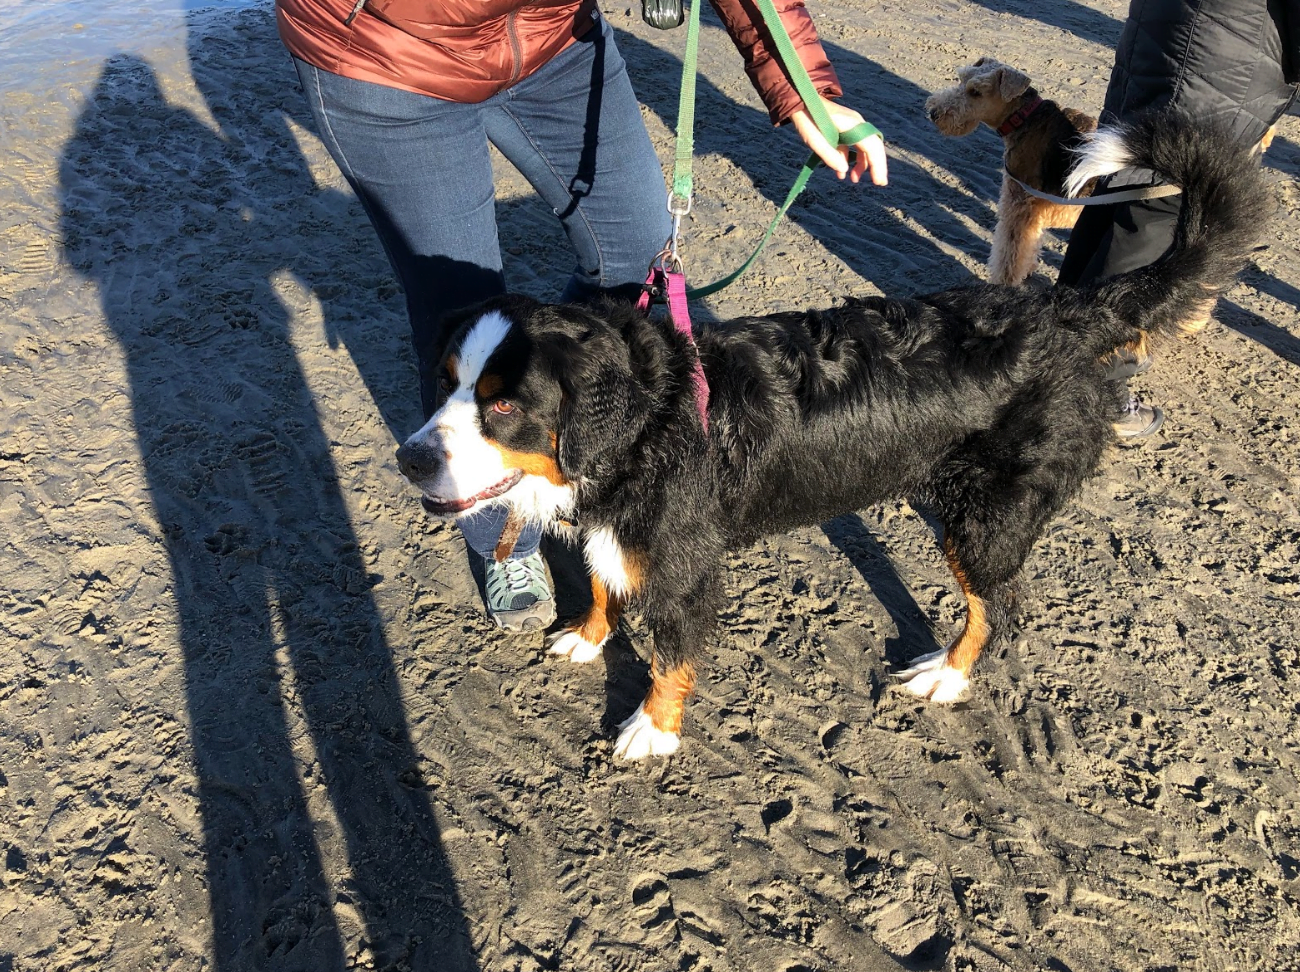 Maggie the Bernese Mountain dog poses for the camera. Dec 29, 2018 Photo: Avery Barakett